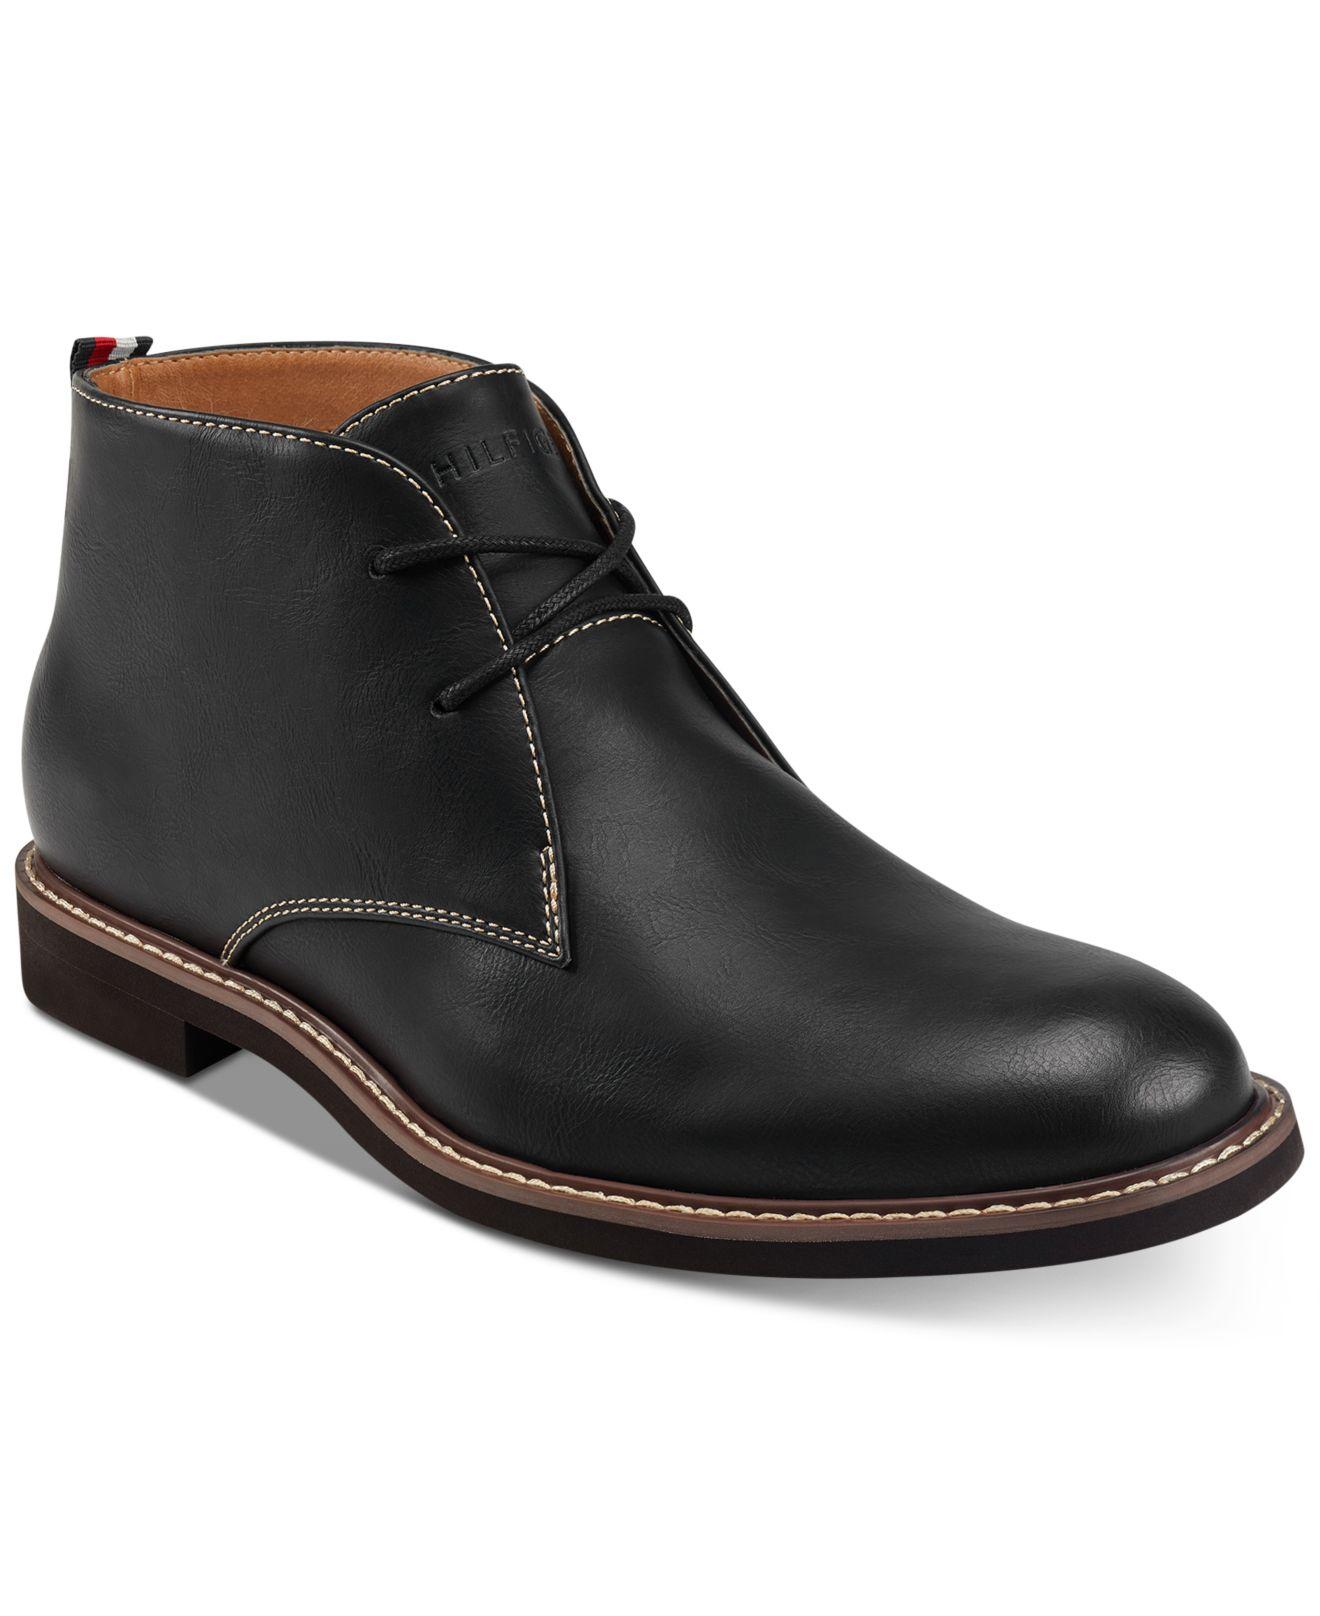 Tommy Hilfiger Cotton Gervis Chukka Boots in Black for Men - Lyst